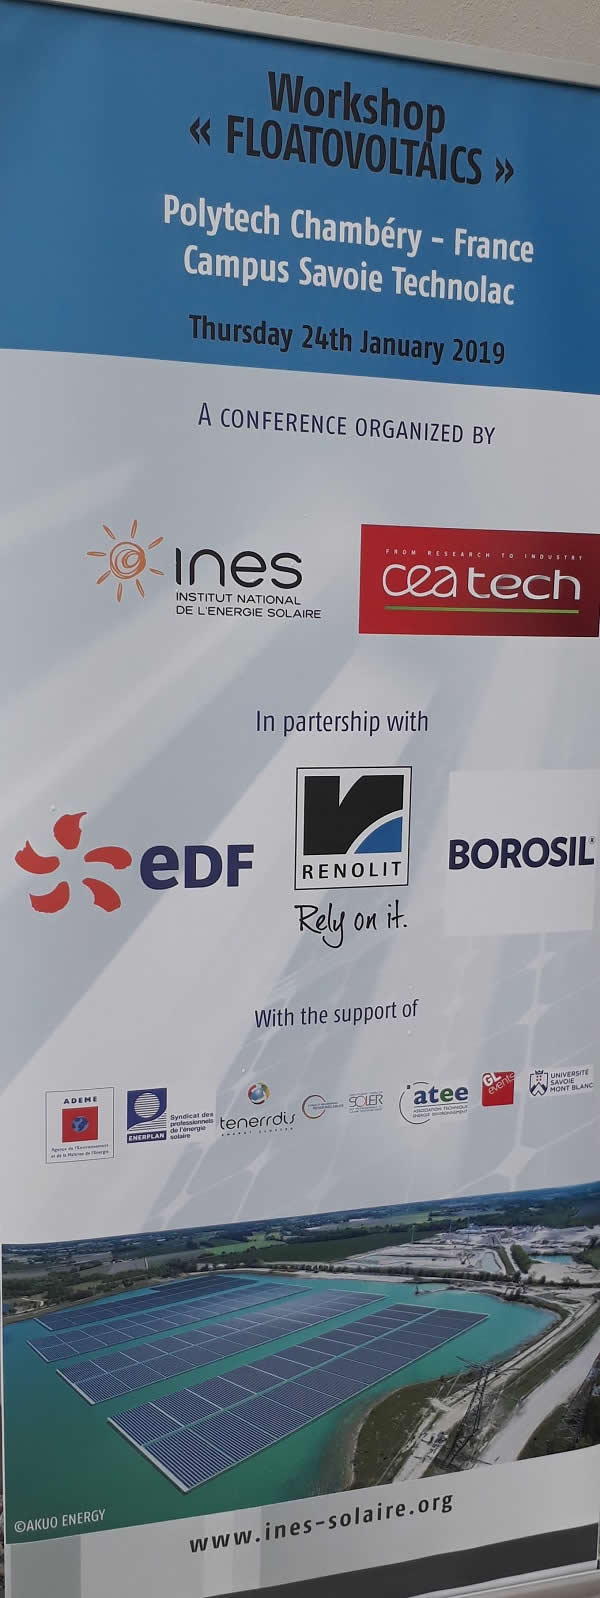 BOROSIL participated in a workshop organised by INES on “Floatovoltaics” at Polytech Chambery, France